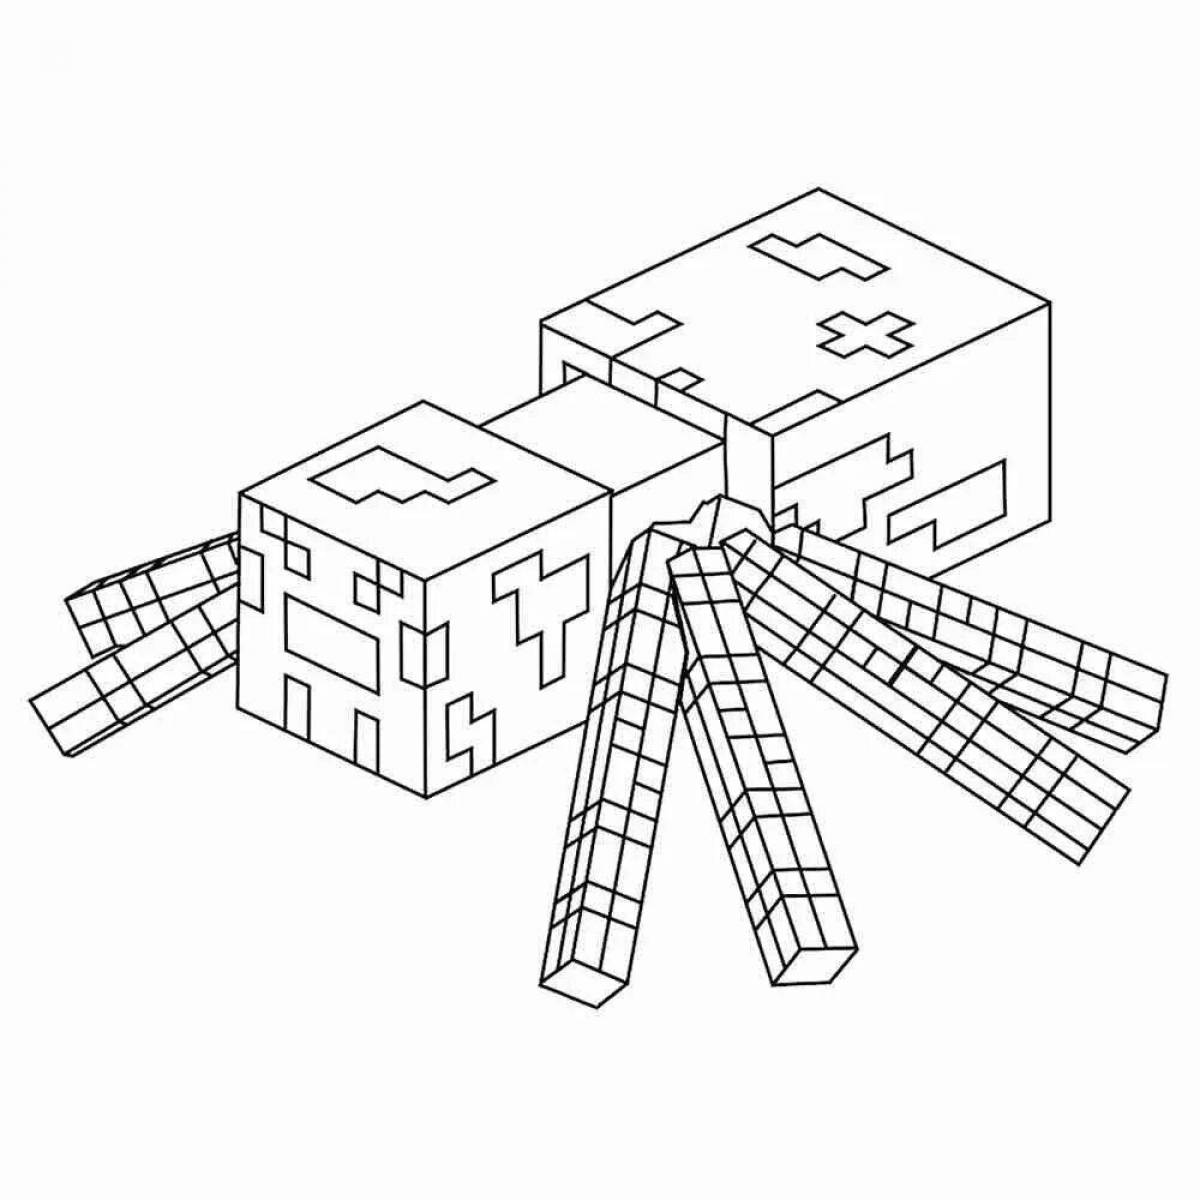 Cute minecraft dog coloring page